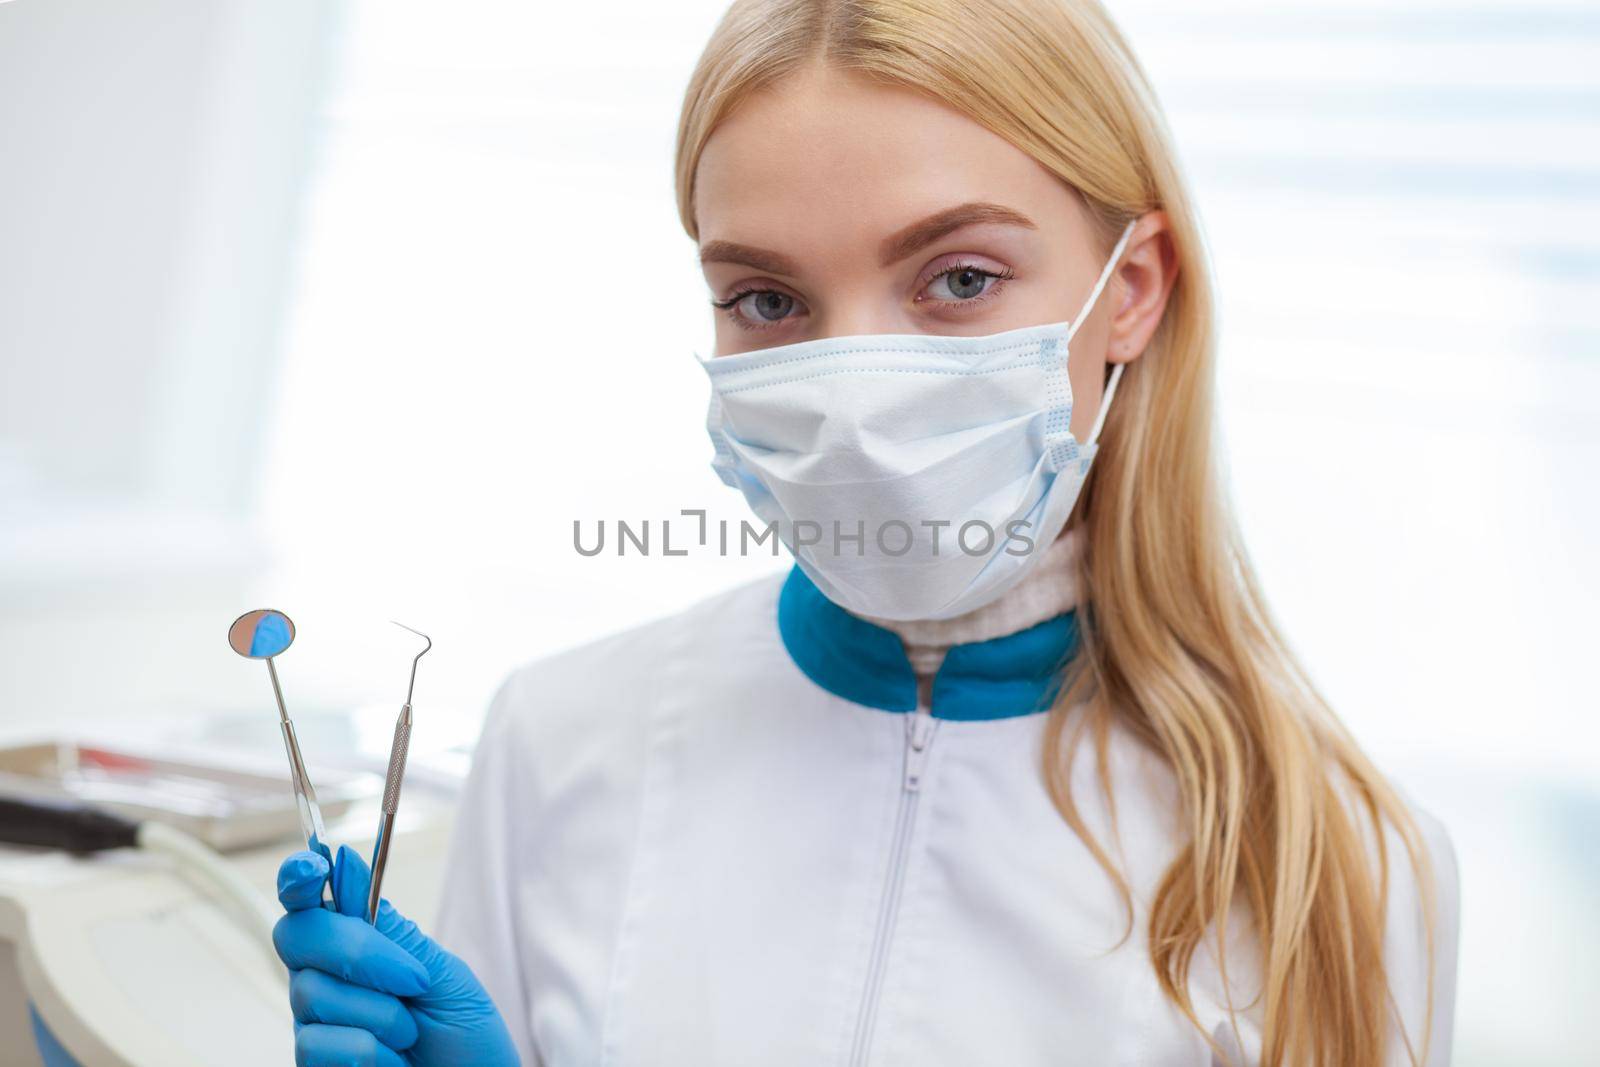 Close up of a young female dentist wearing medical mask holding dental medical tools, looking to the camera. Professional dentist holding oral tools, ready to examine teeth. Smile, teeth care concept